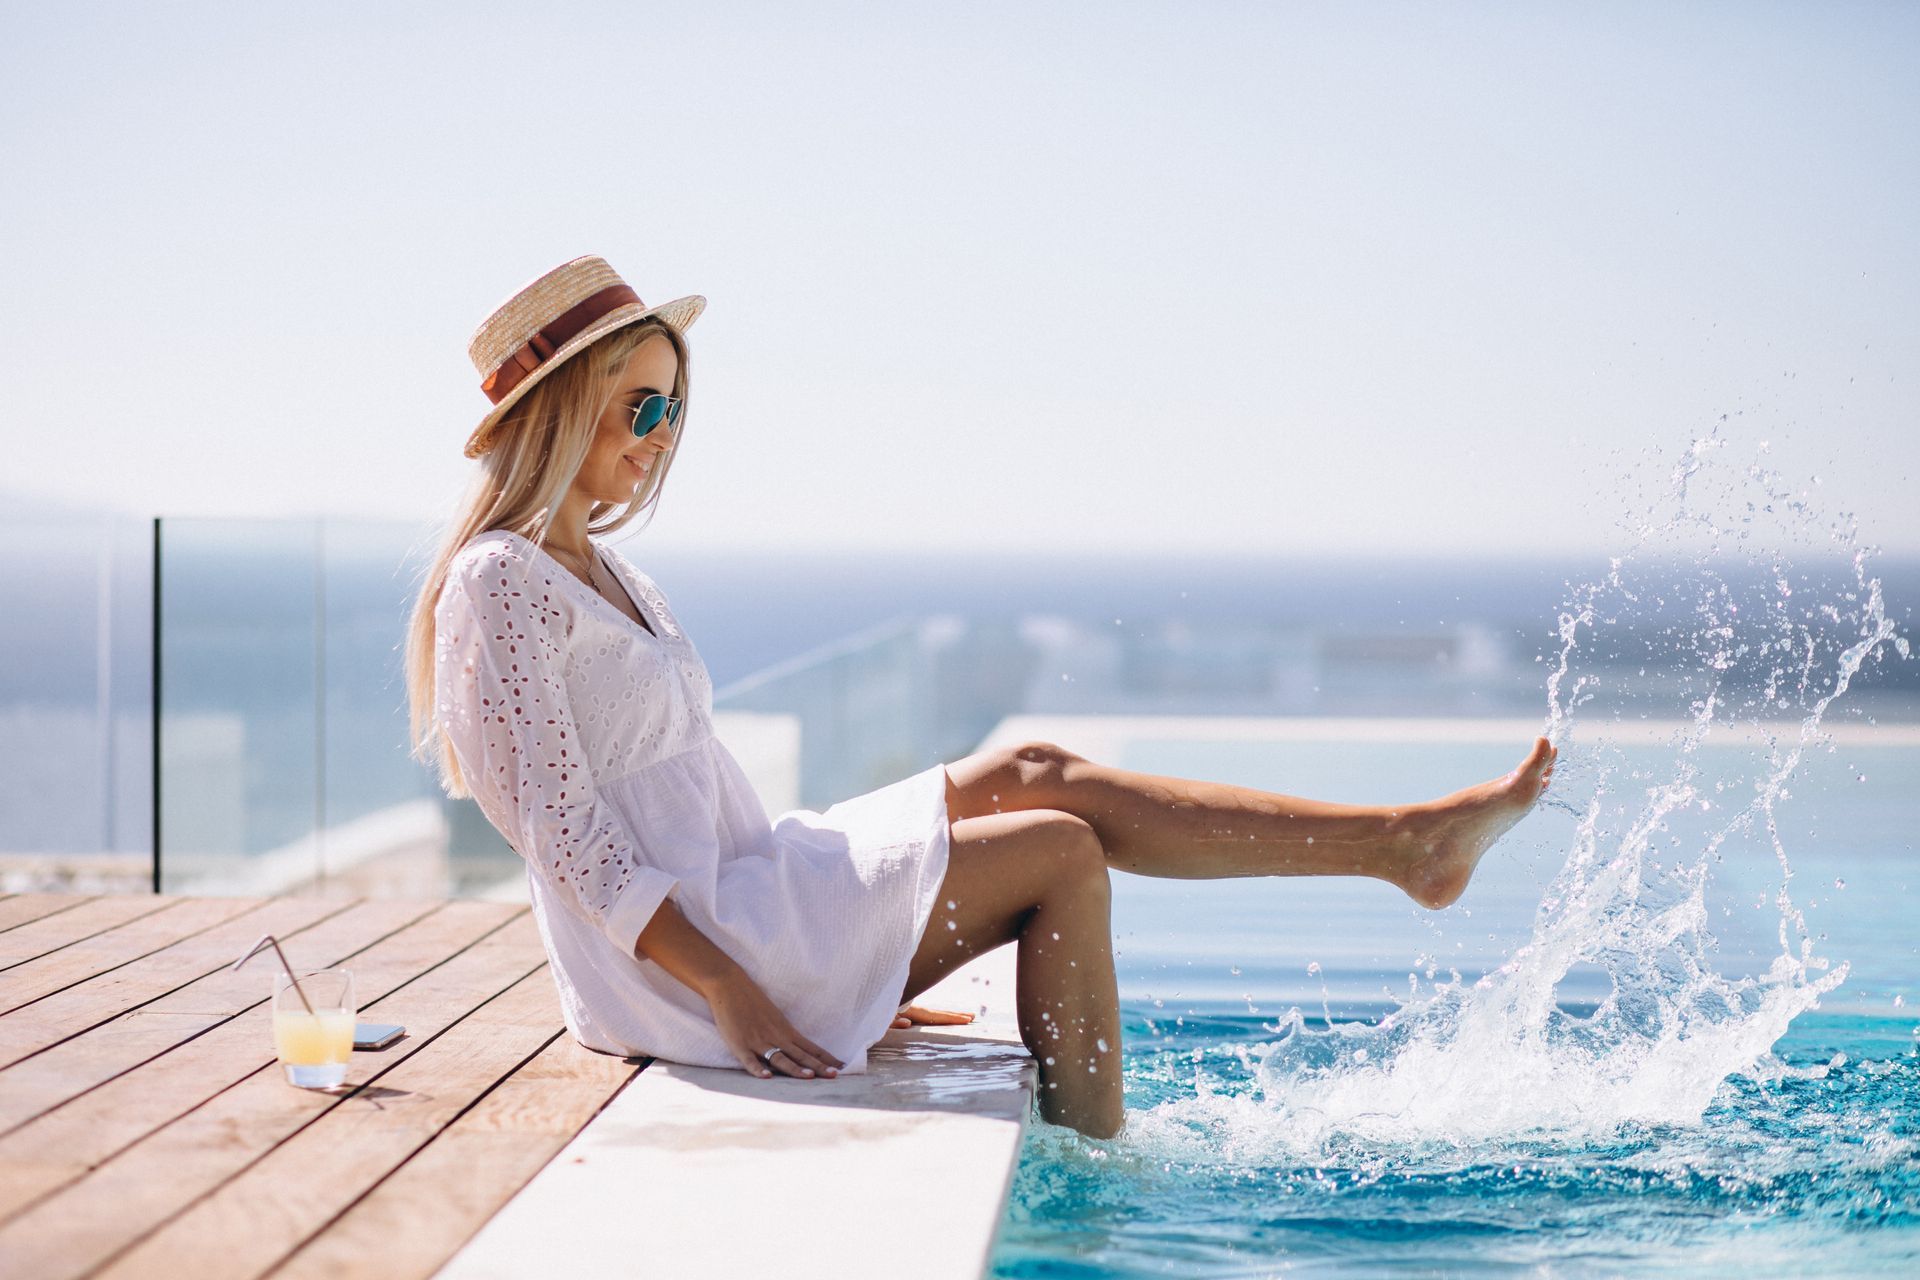 A woman is sitting on the edge of a swimming pool with her feet in the water.